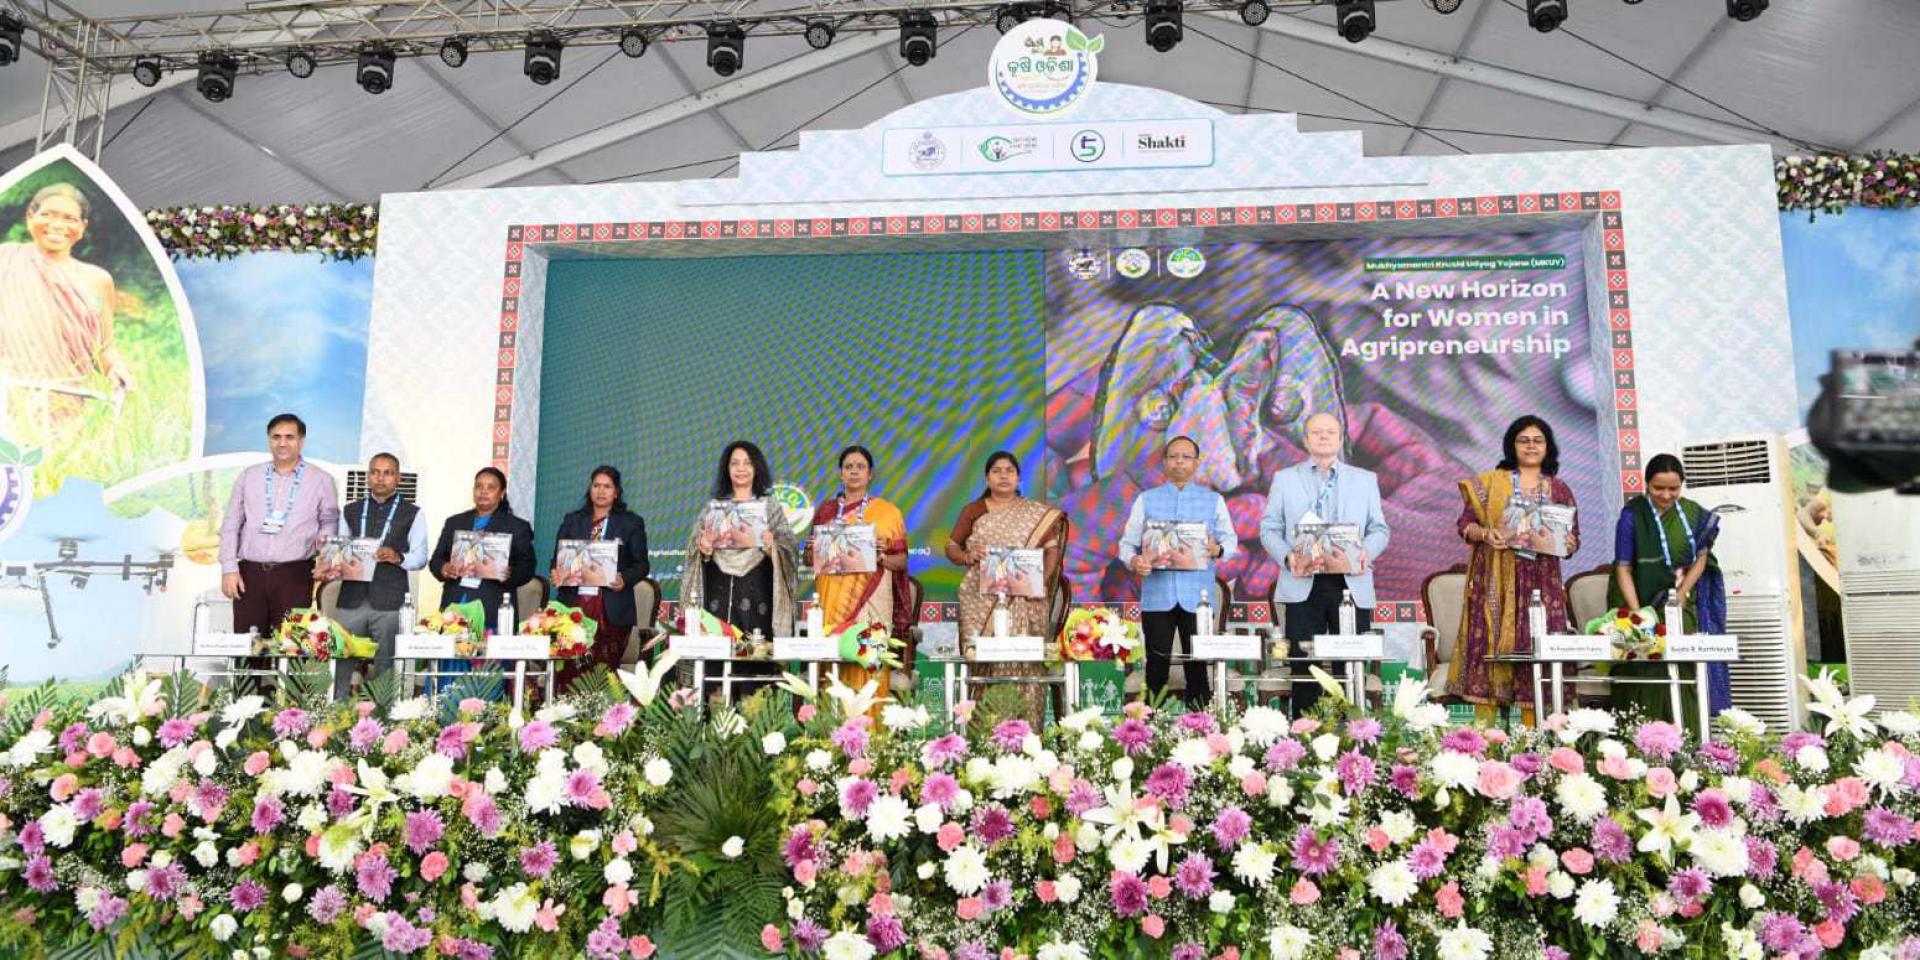 Panelists at the pre-inaugural session led by the Gender and Nutrition Cluster of ICRISAT